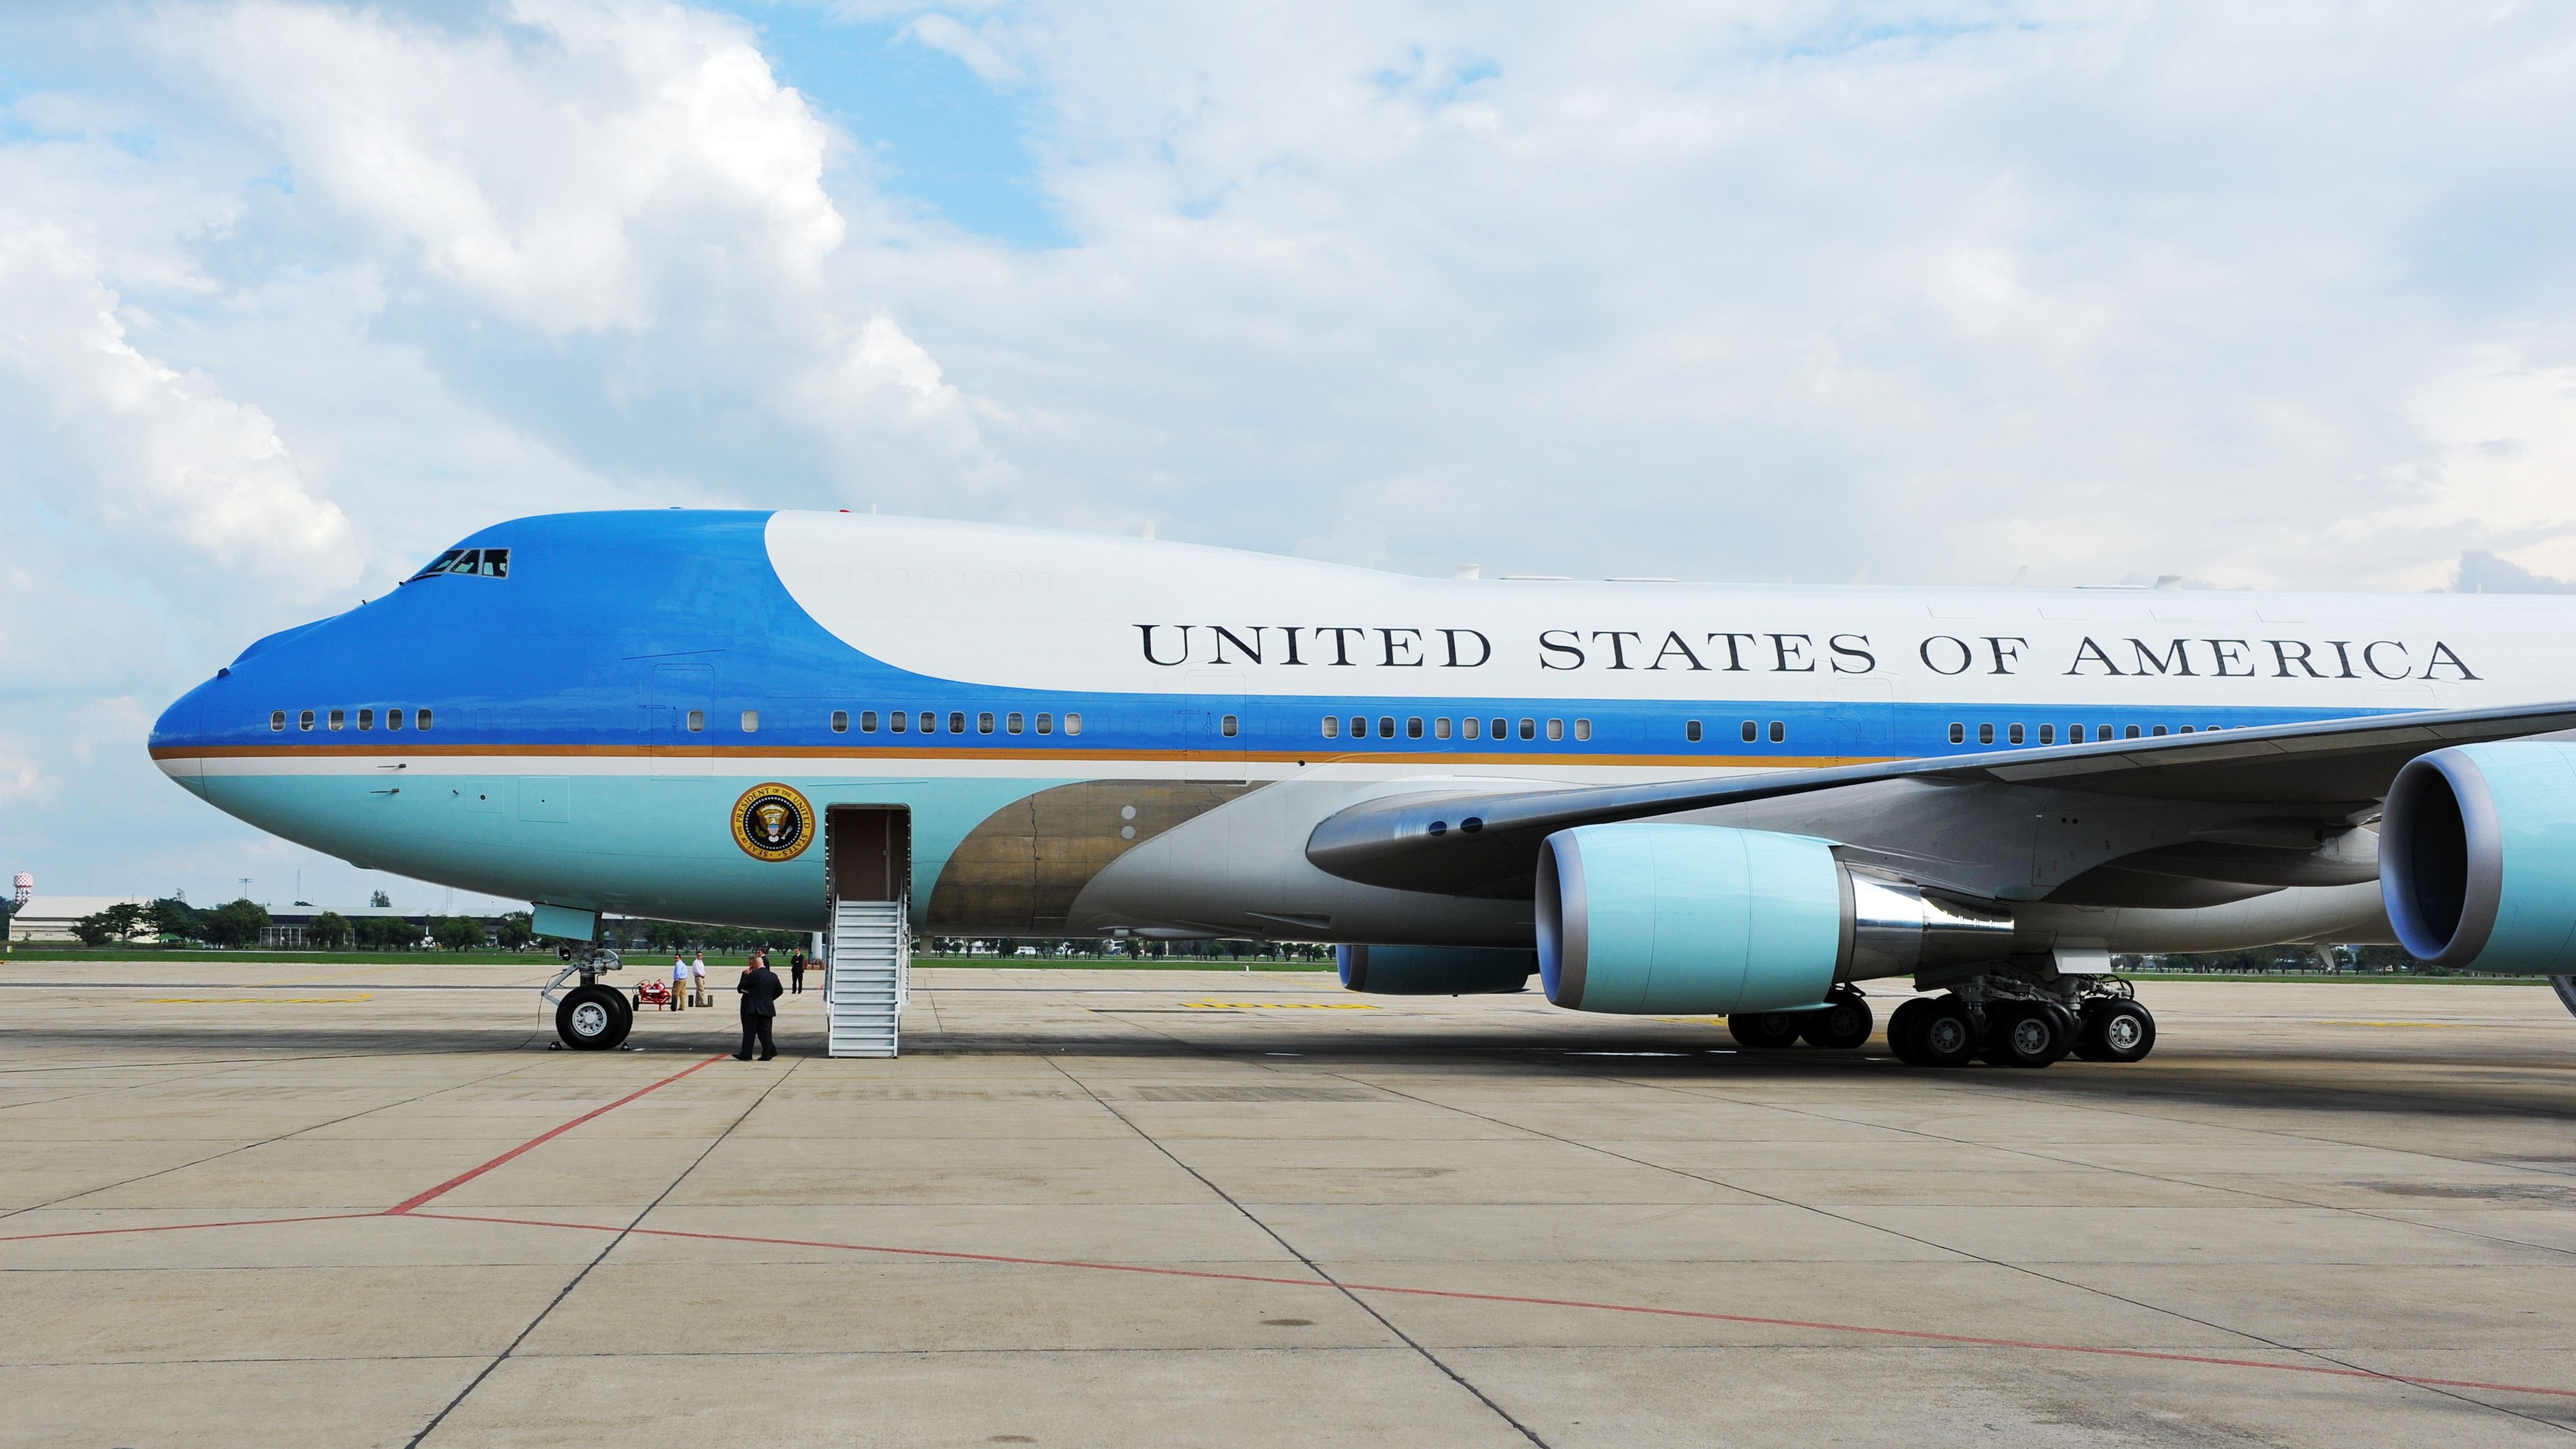 Boeing 747 VC-25 Air Force One